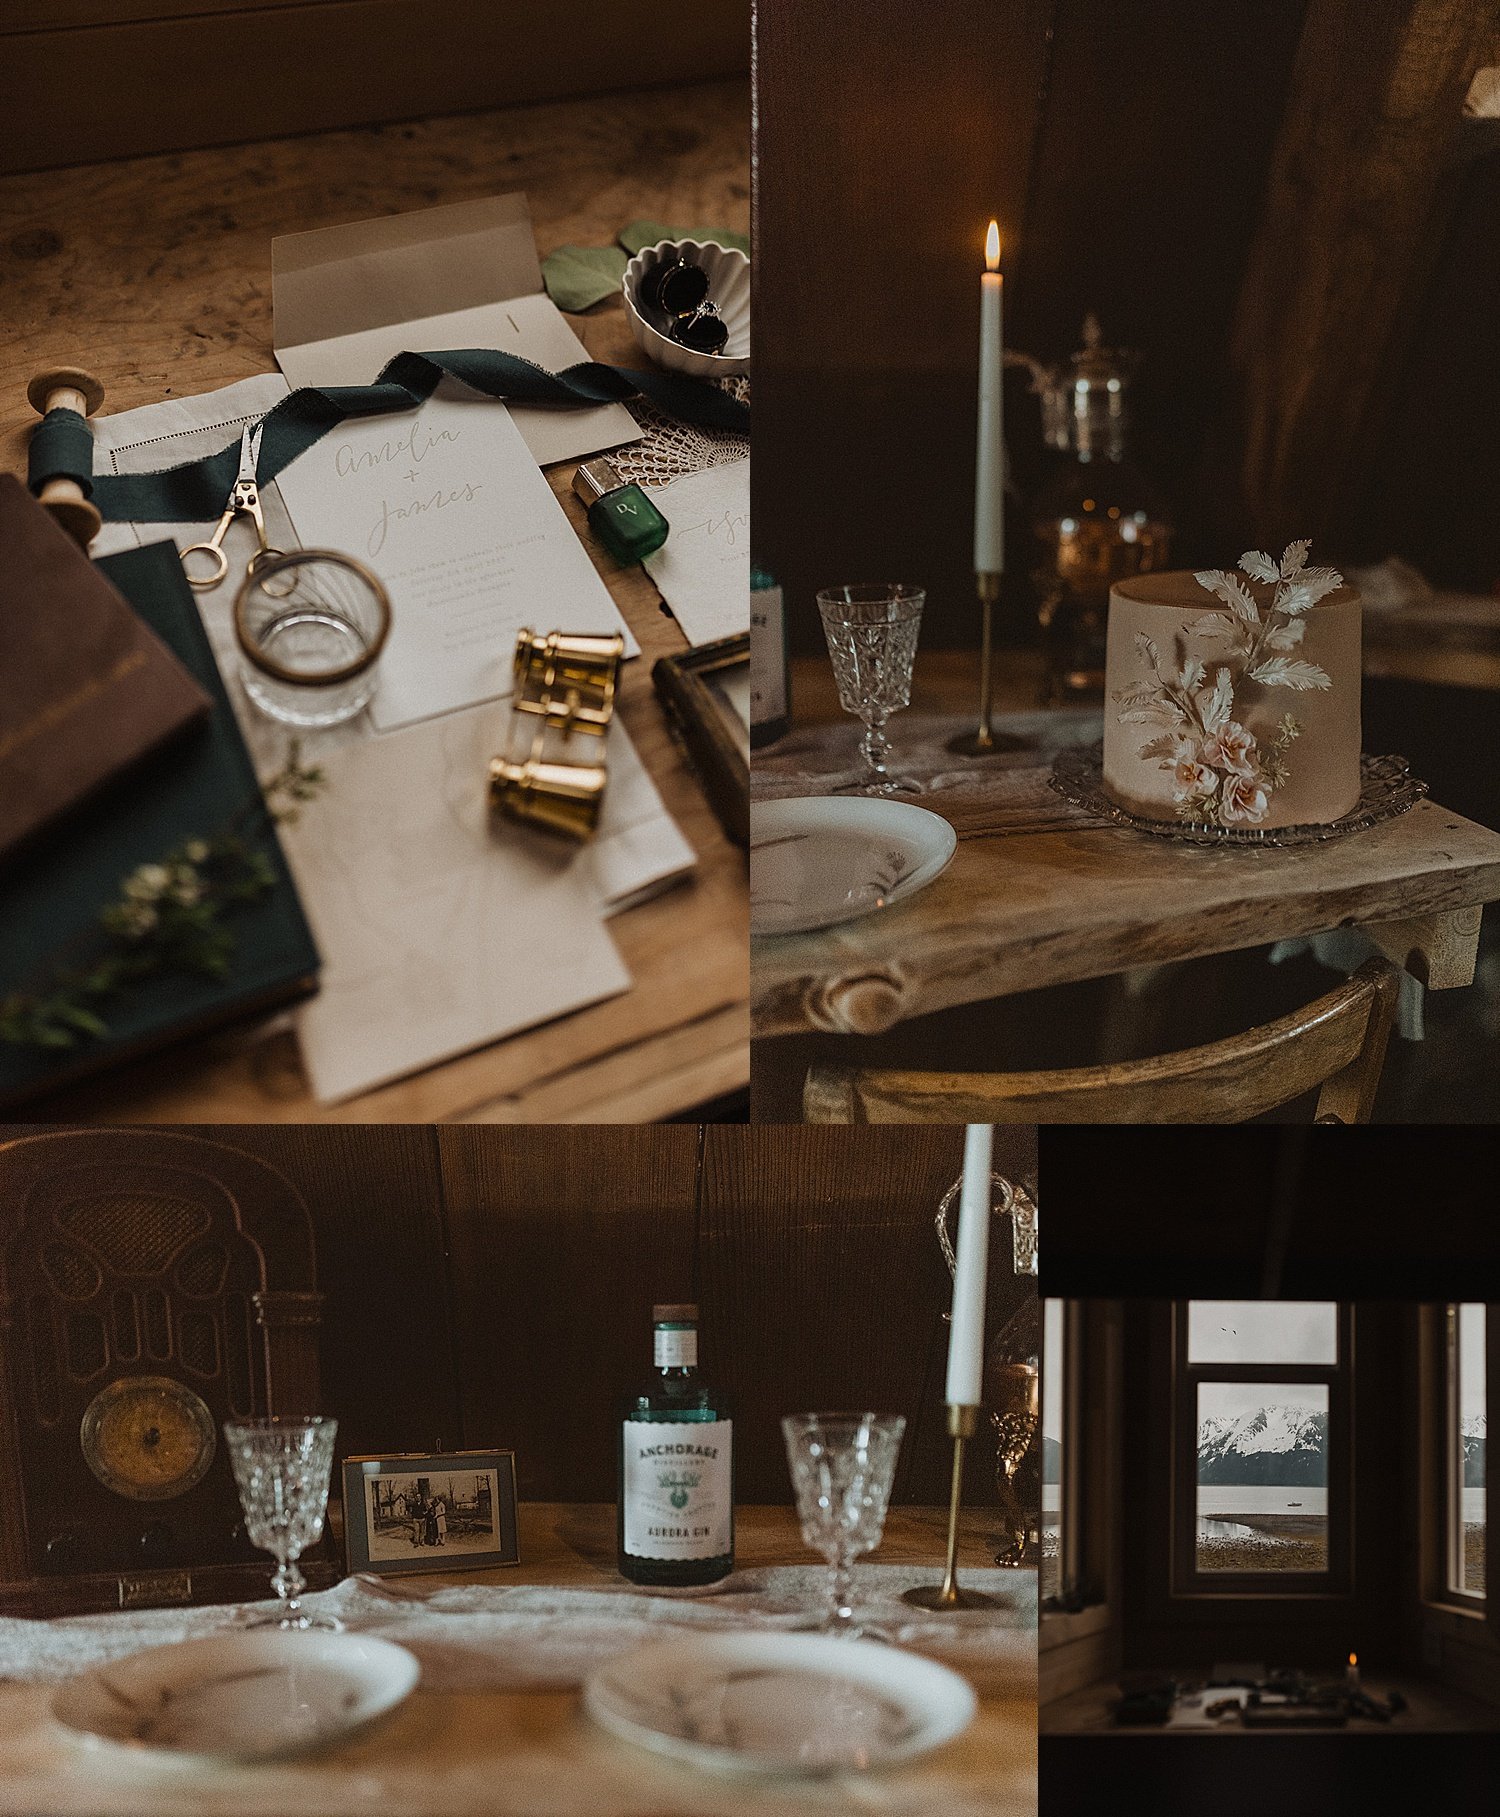  Detail shots of wedding stationary, place settings, candles, and table at styled shoot from Alaska wedding photographer 